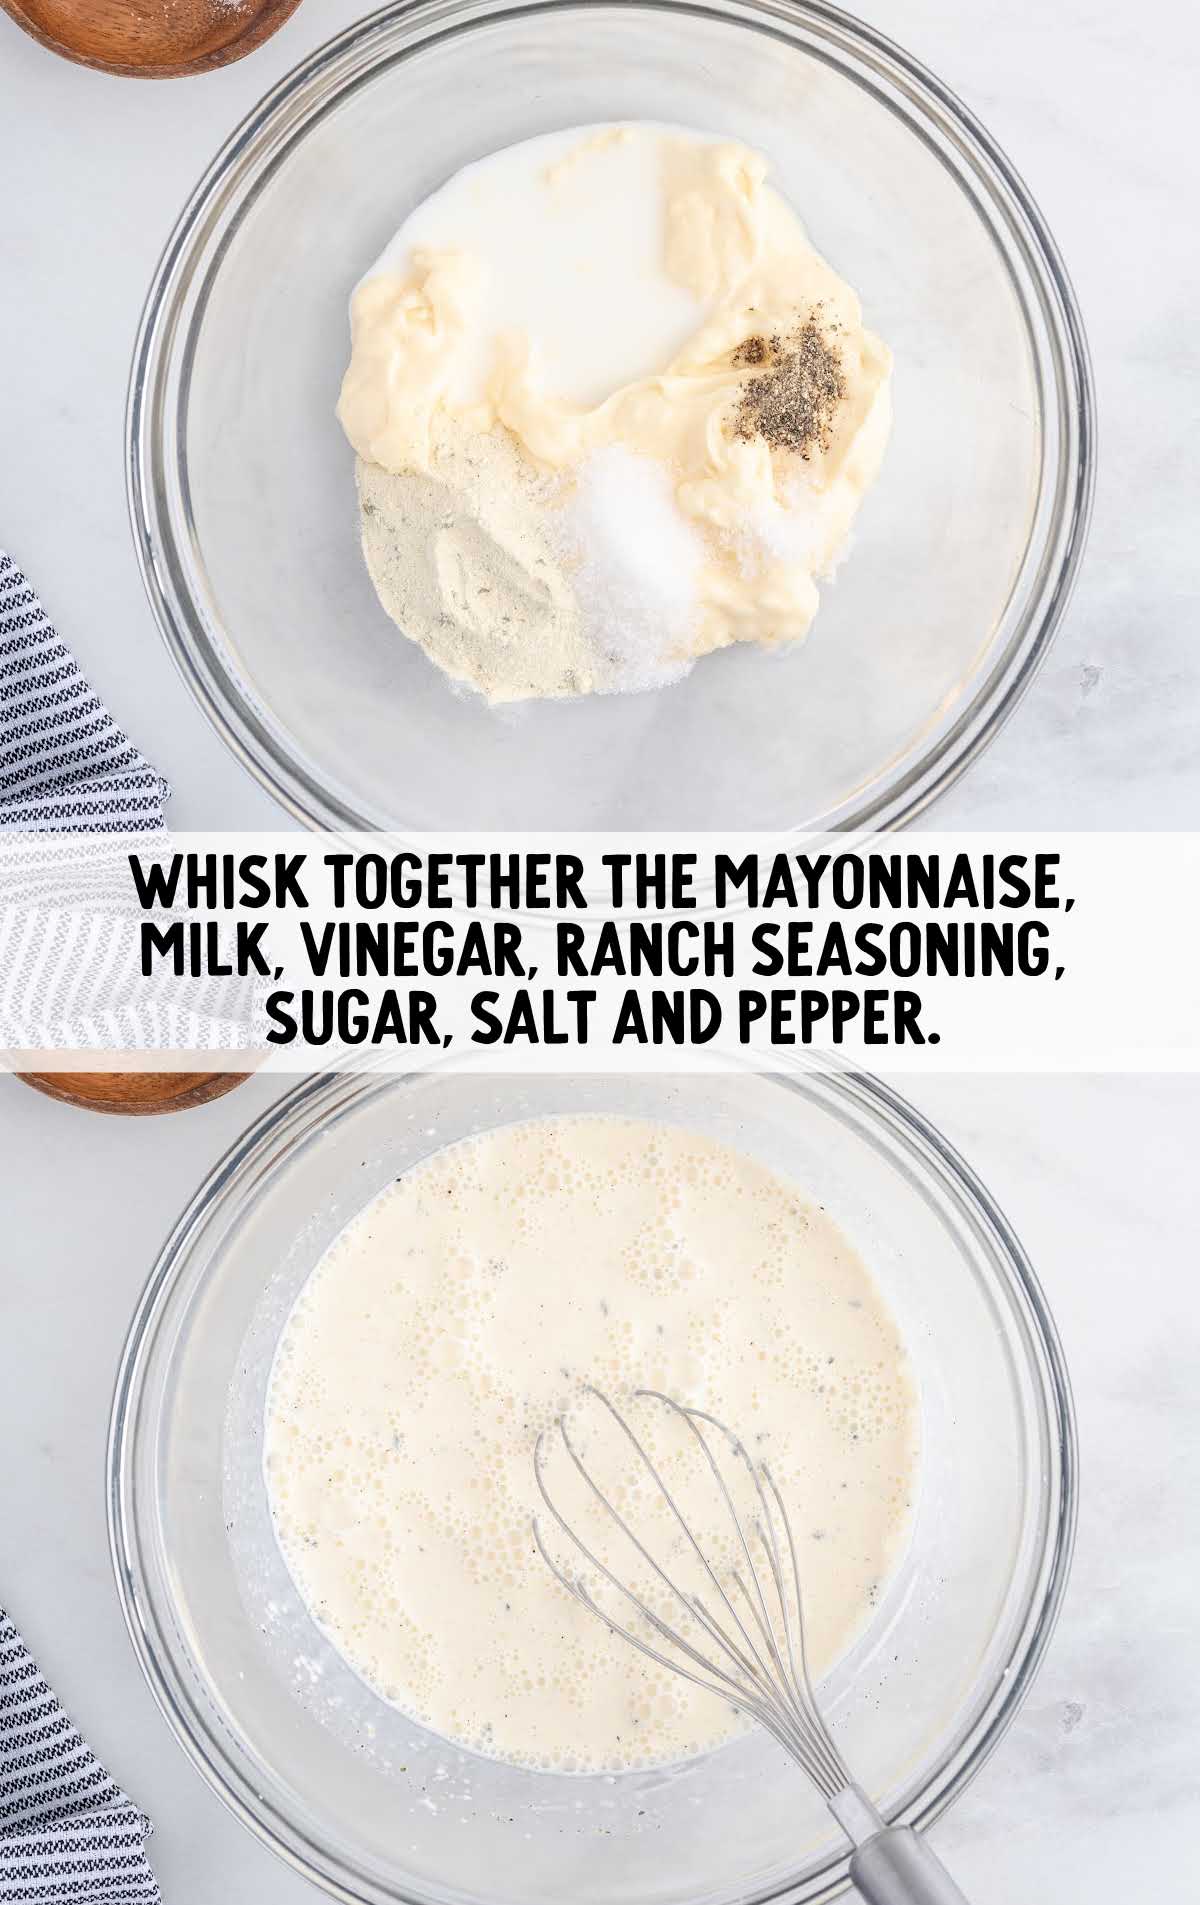 mayonnaise, milk, vinegar, ranch seasoning, sugar, salt and pepper whisked together in a bowl